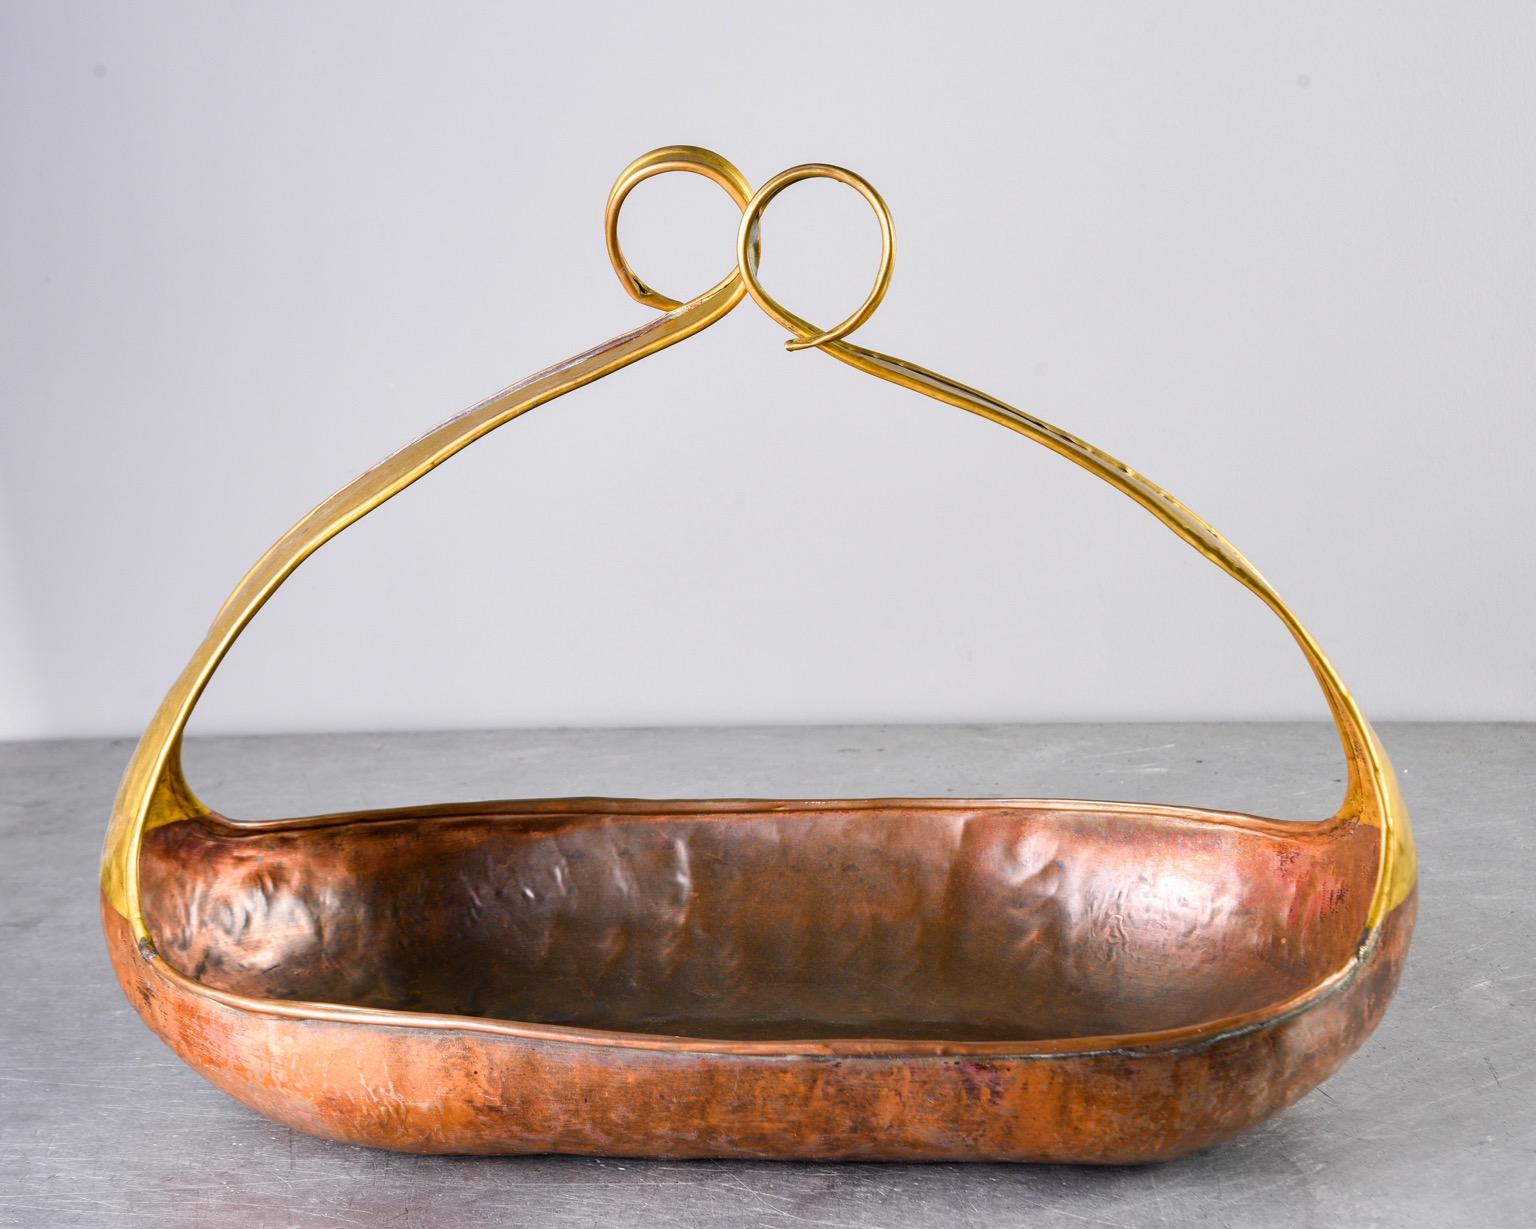 Large circa 1960s handmade hammered copper and brass bowl with tall, tapered sides with scrolled ends that form a basket-like handle. Unknown maker. Found in Italy.